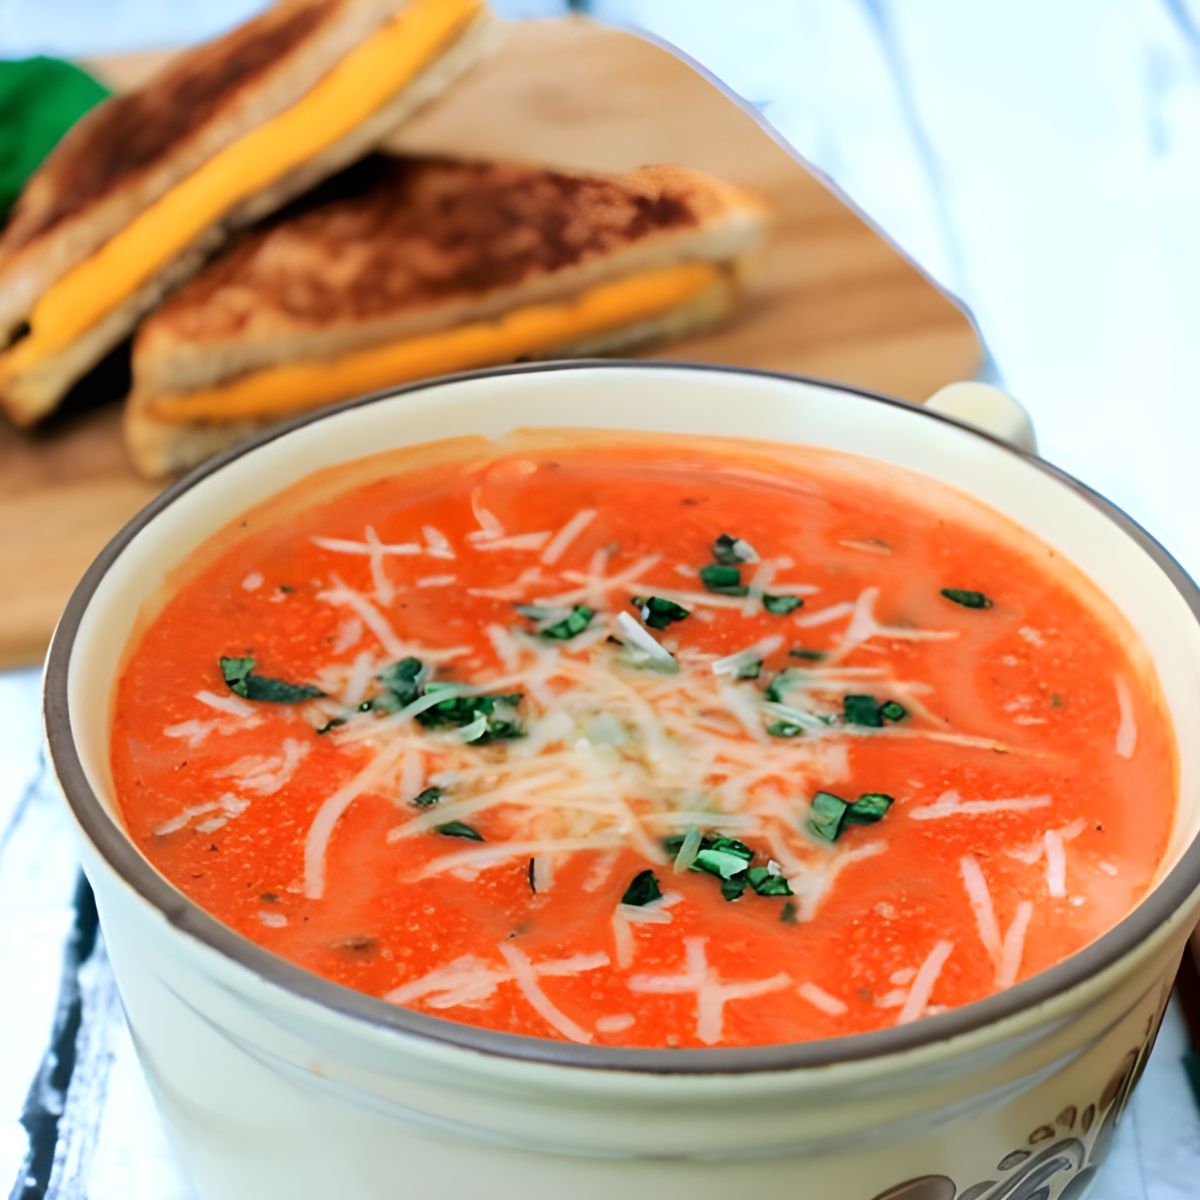 Slow Cooker Tomato Soup with Fresh Tomatoes - The Rebel Chick